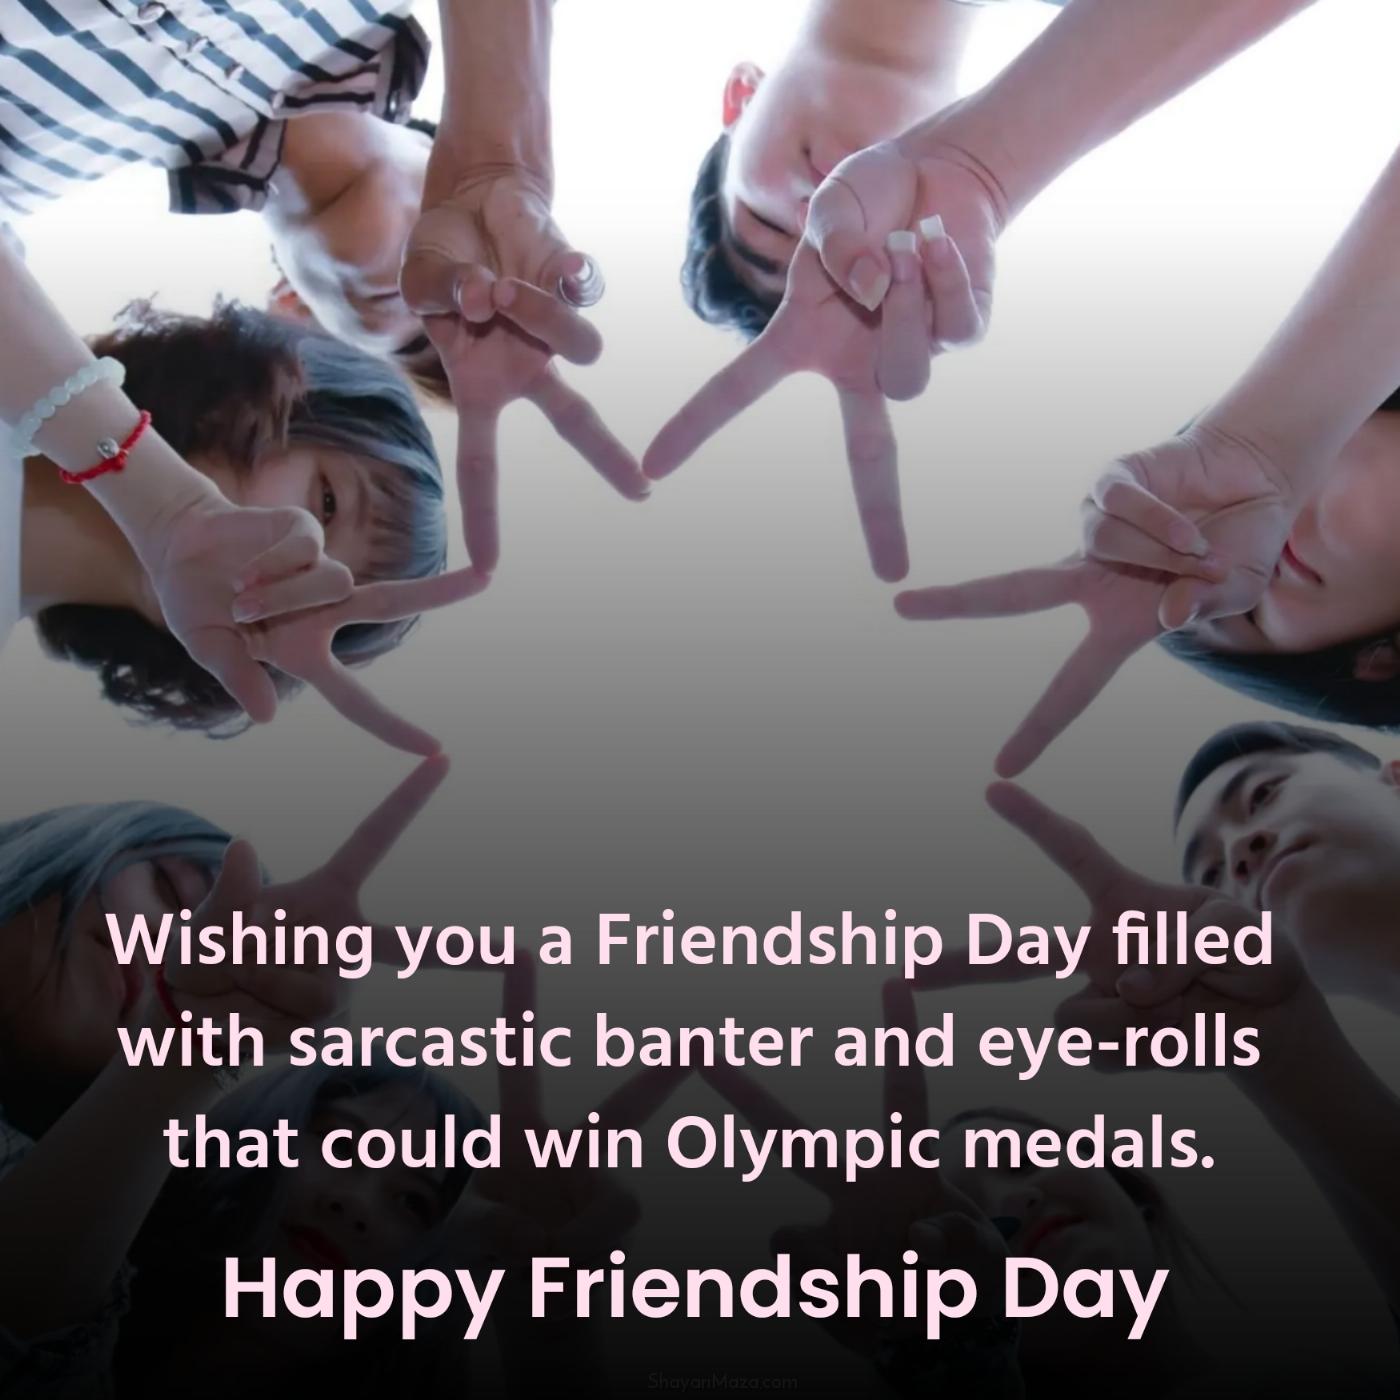 Wishing you a Friendship Day filled with sarcastic banter and eye-rolls